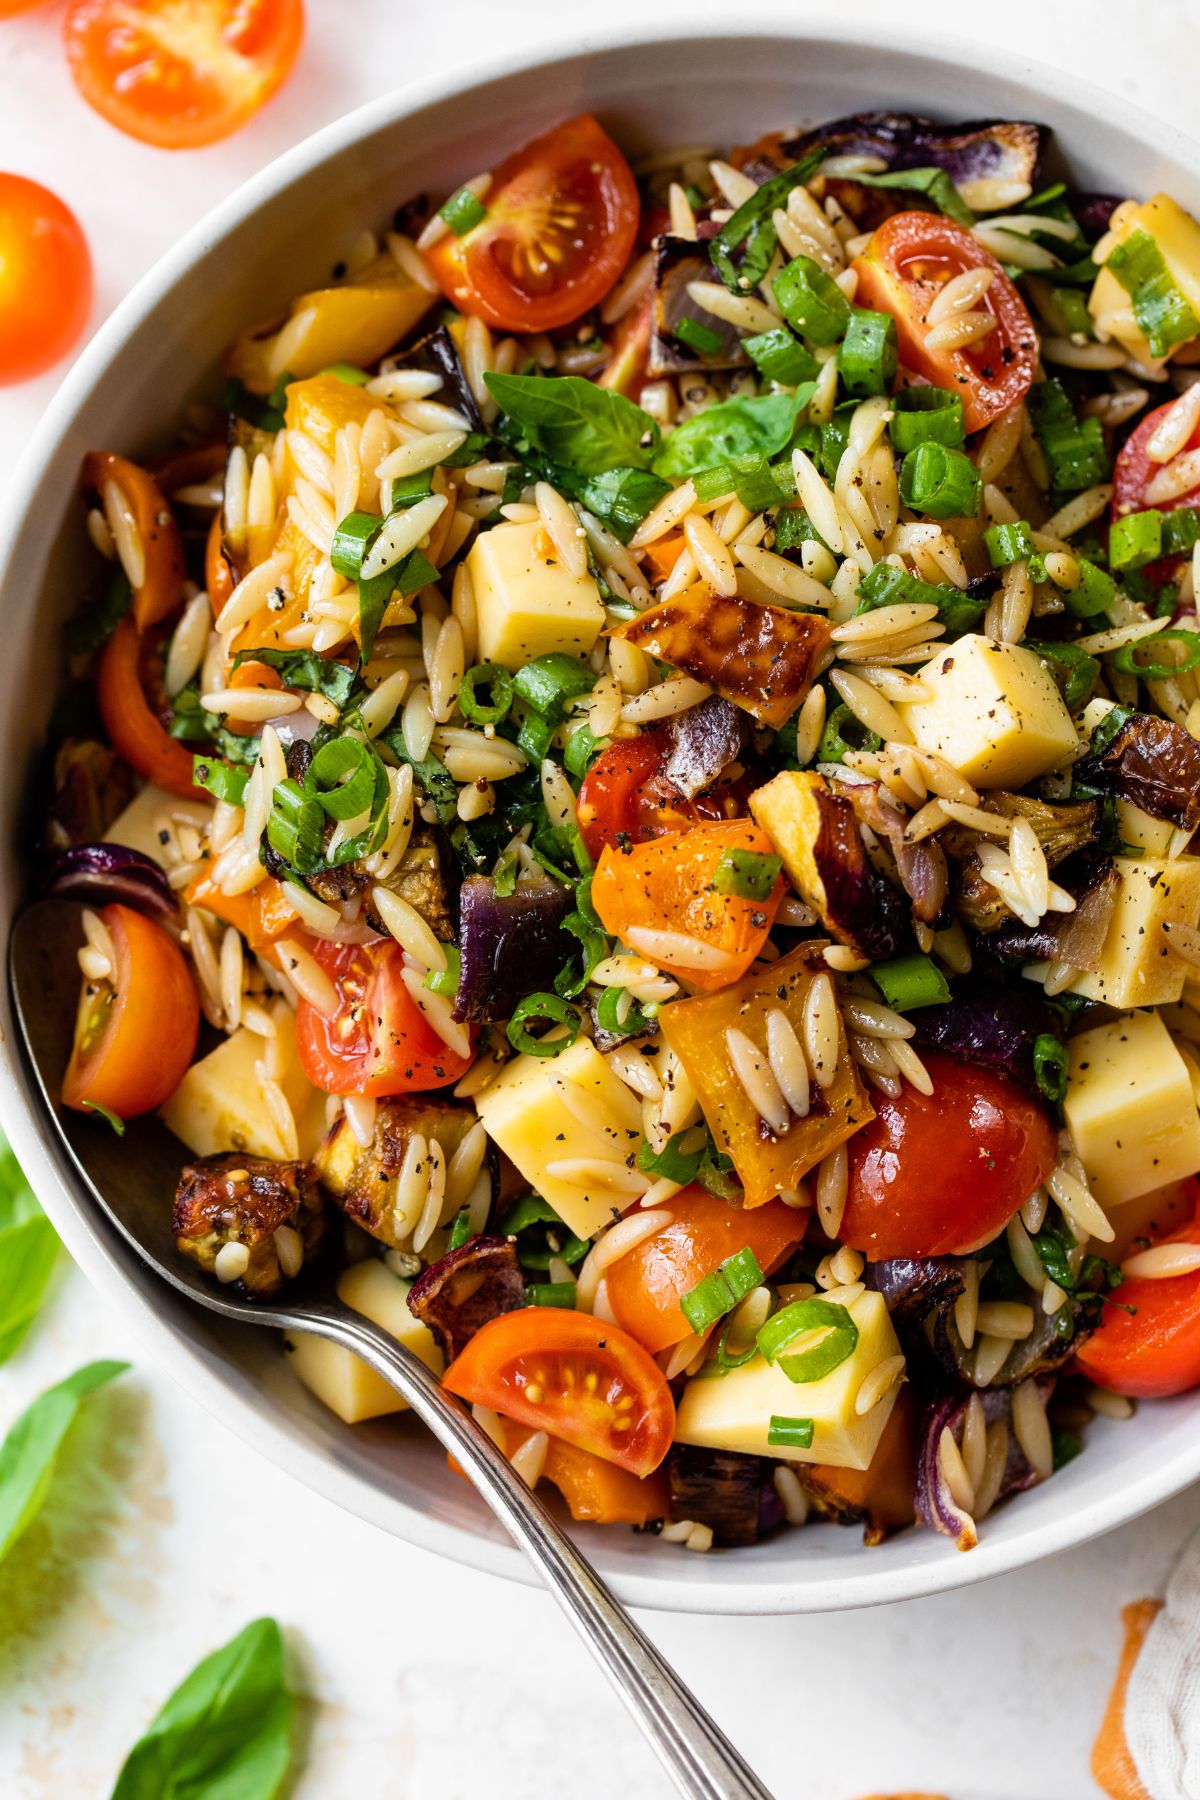 Orzo pasta mixed with roasted veggies, cherry tomatoes and herbs.